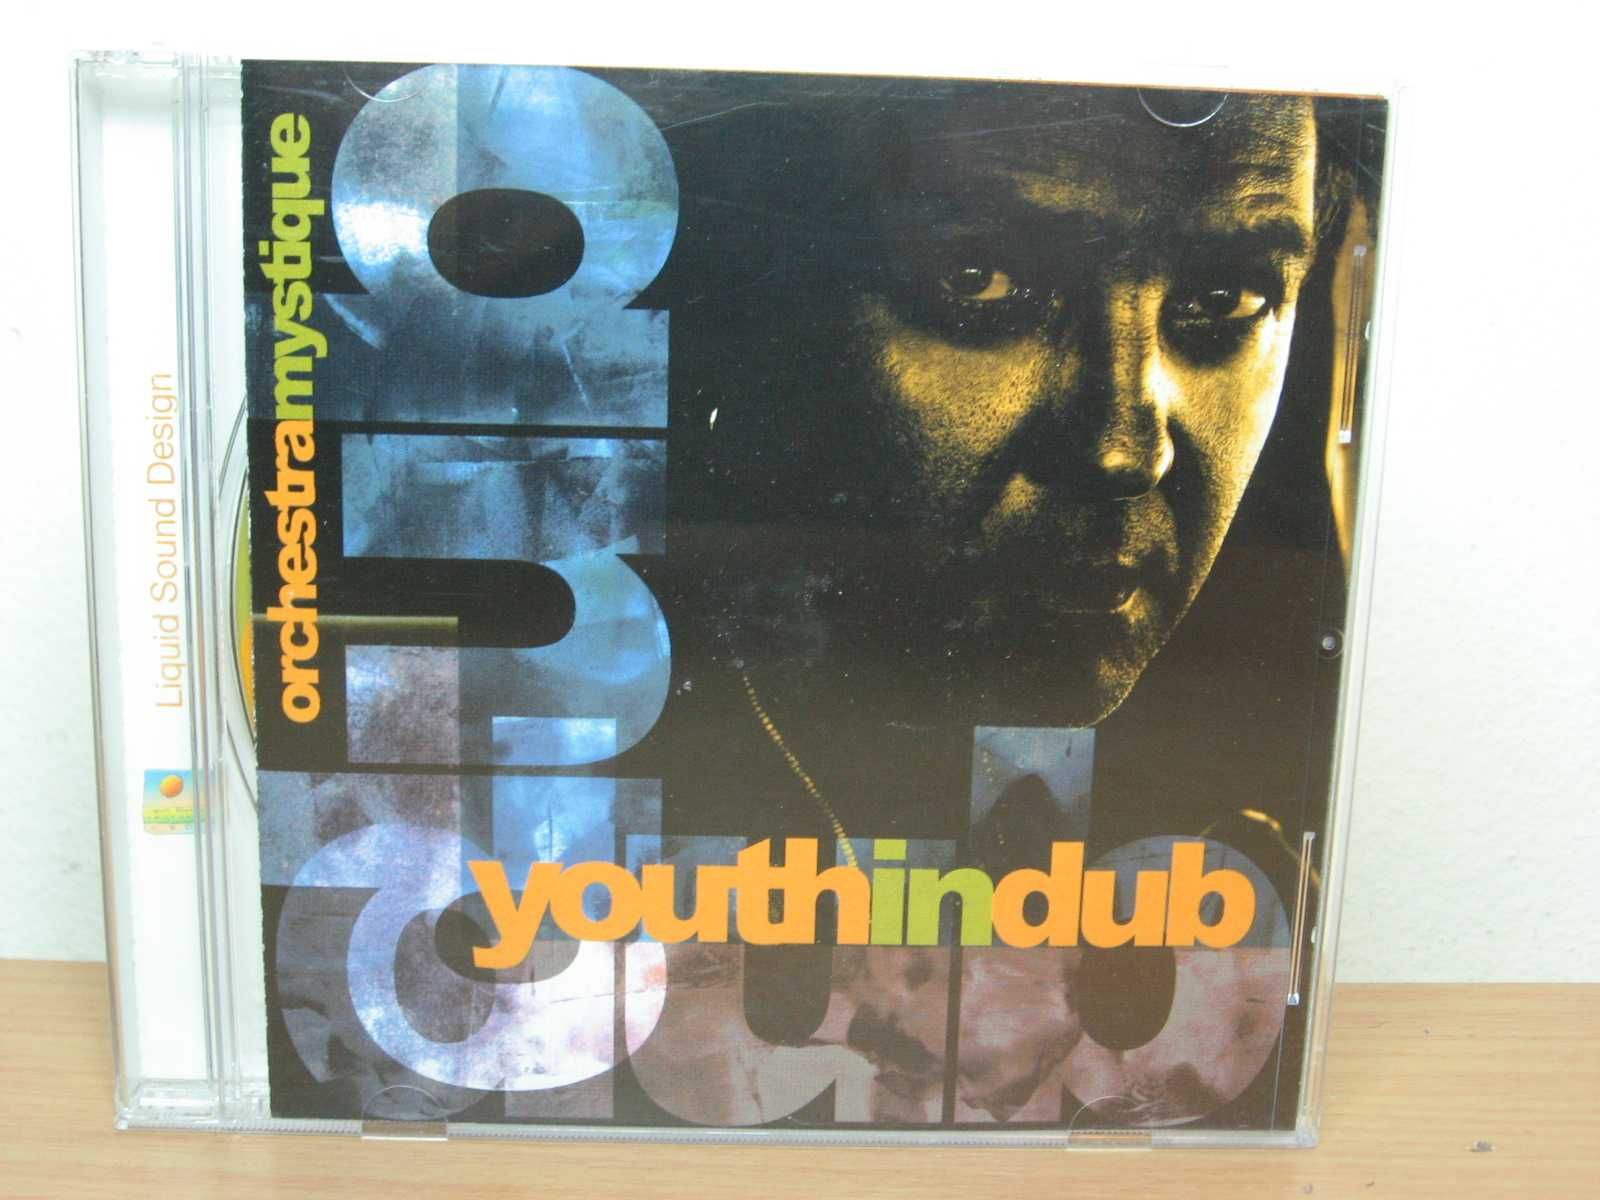 CD musica world electronica youth in dub